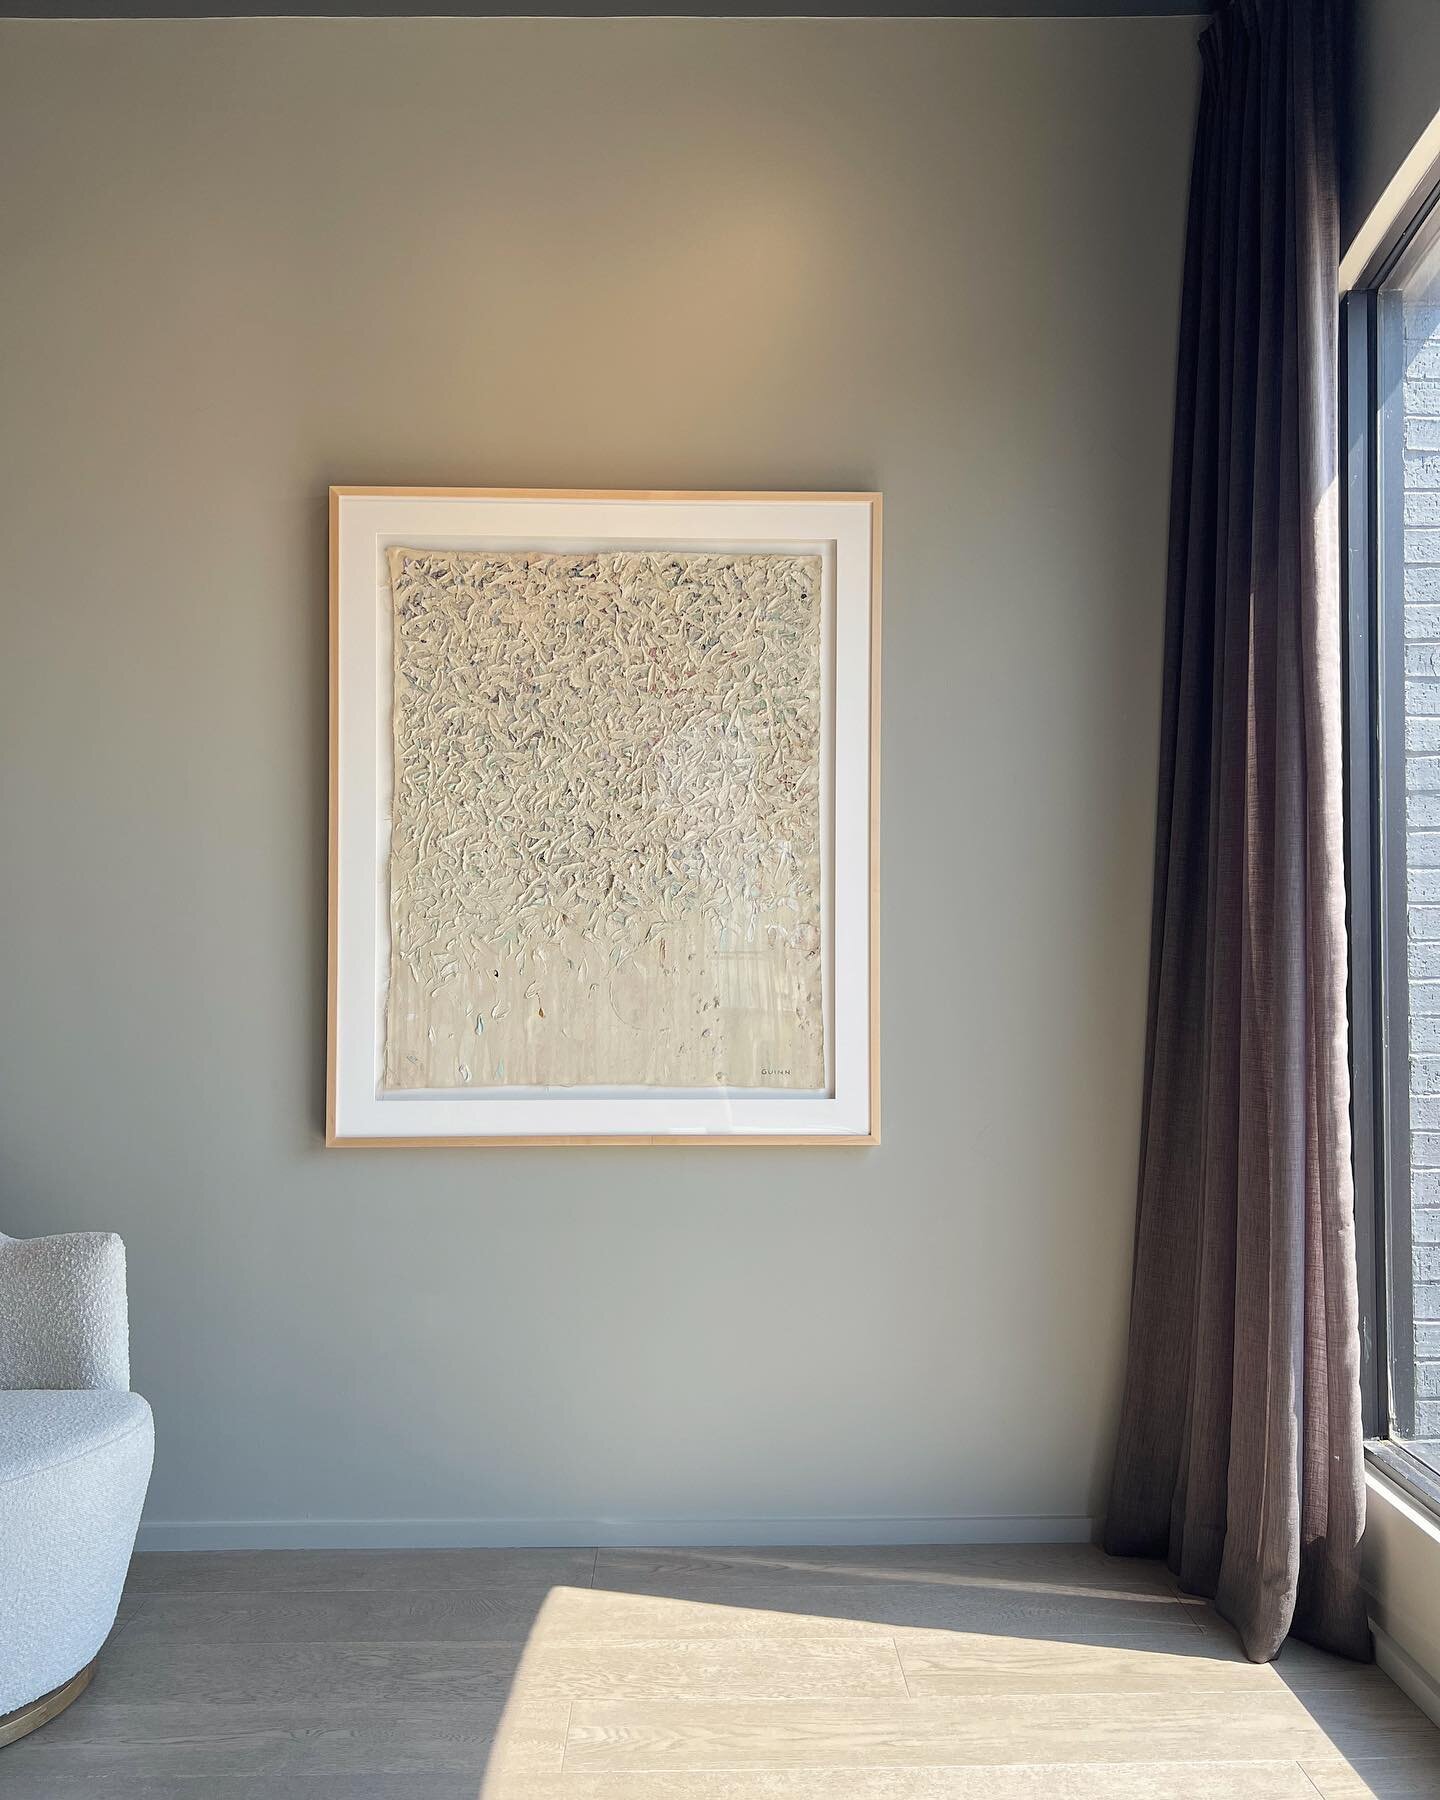 New @tylerbuckguinn pieces going up in our front showrooms. Loving these neutrals on unstretched canvas! Each piece has signature Guinn elements but with a new and truly distinct style.

Foundation Study No. 2
@tylerbuckguinn
50&rdquo;x42&rdquo;